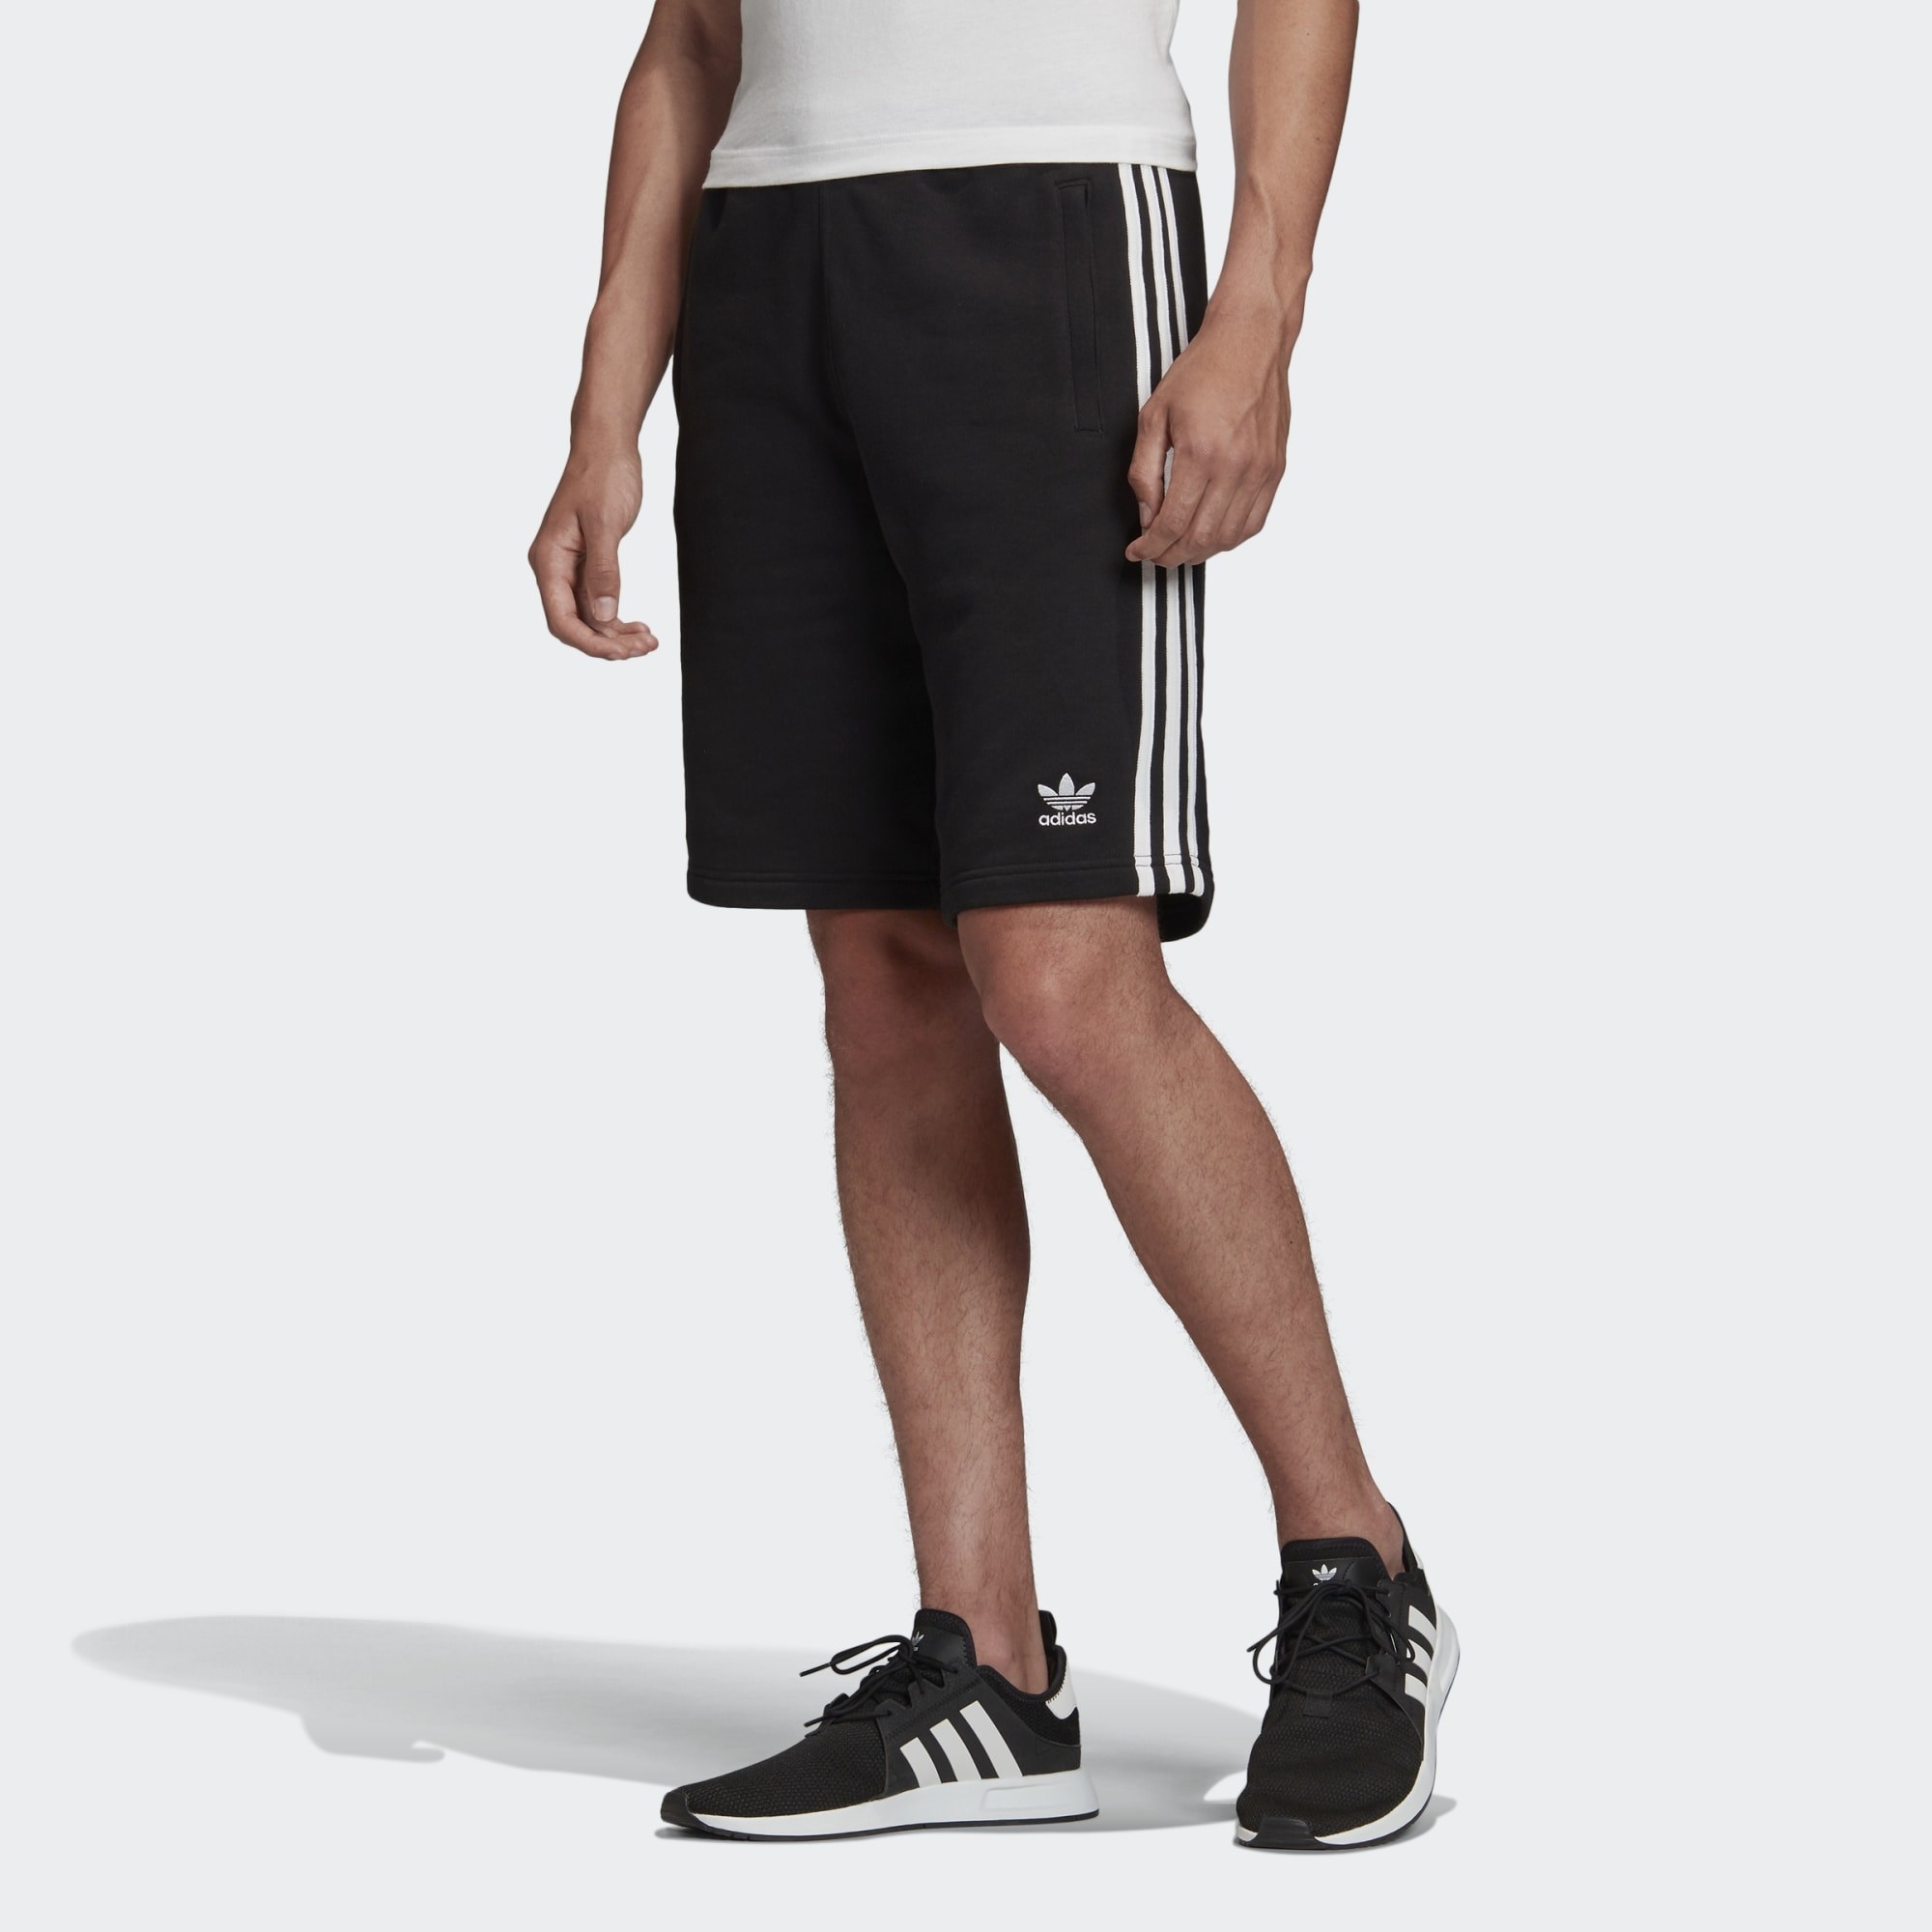 A person wearing shorts and sneakers